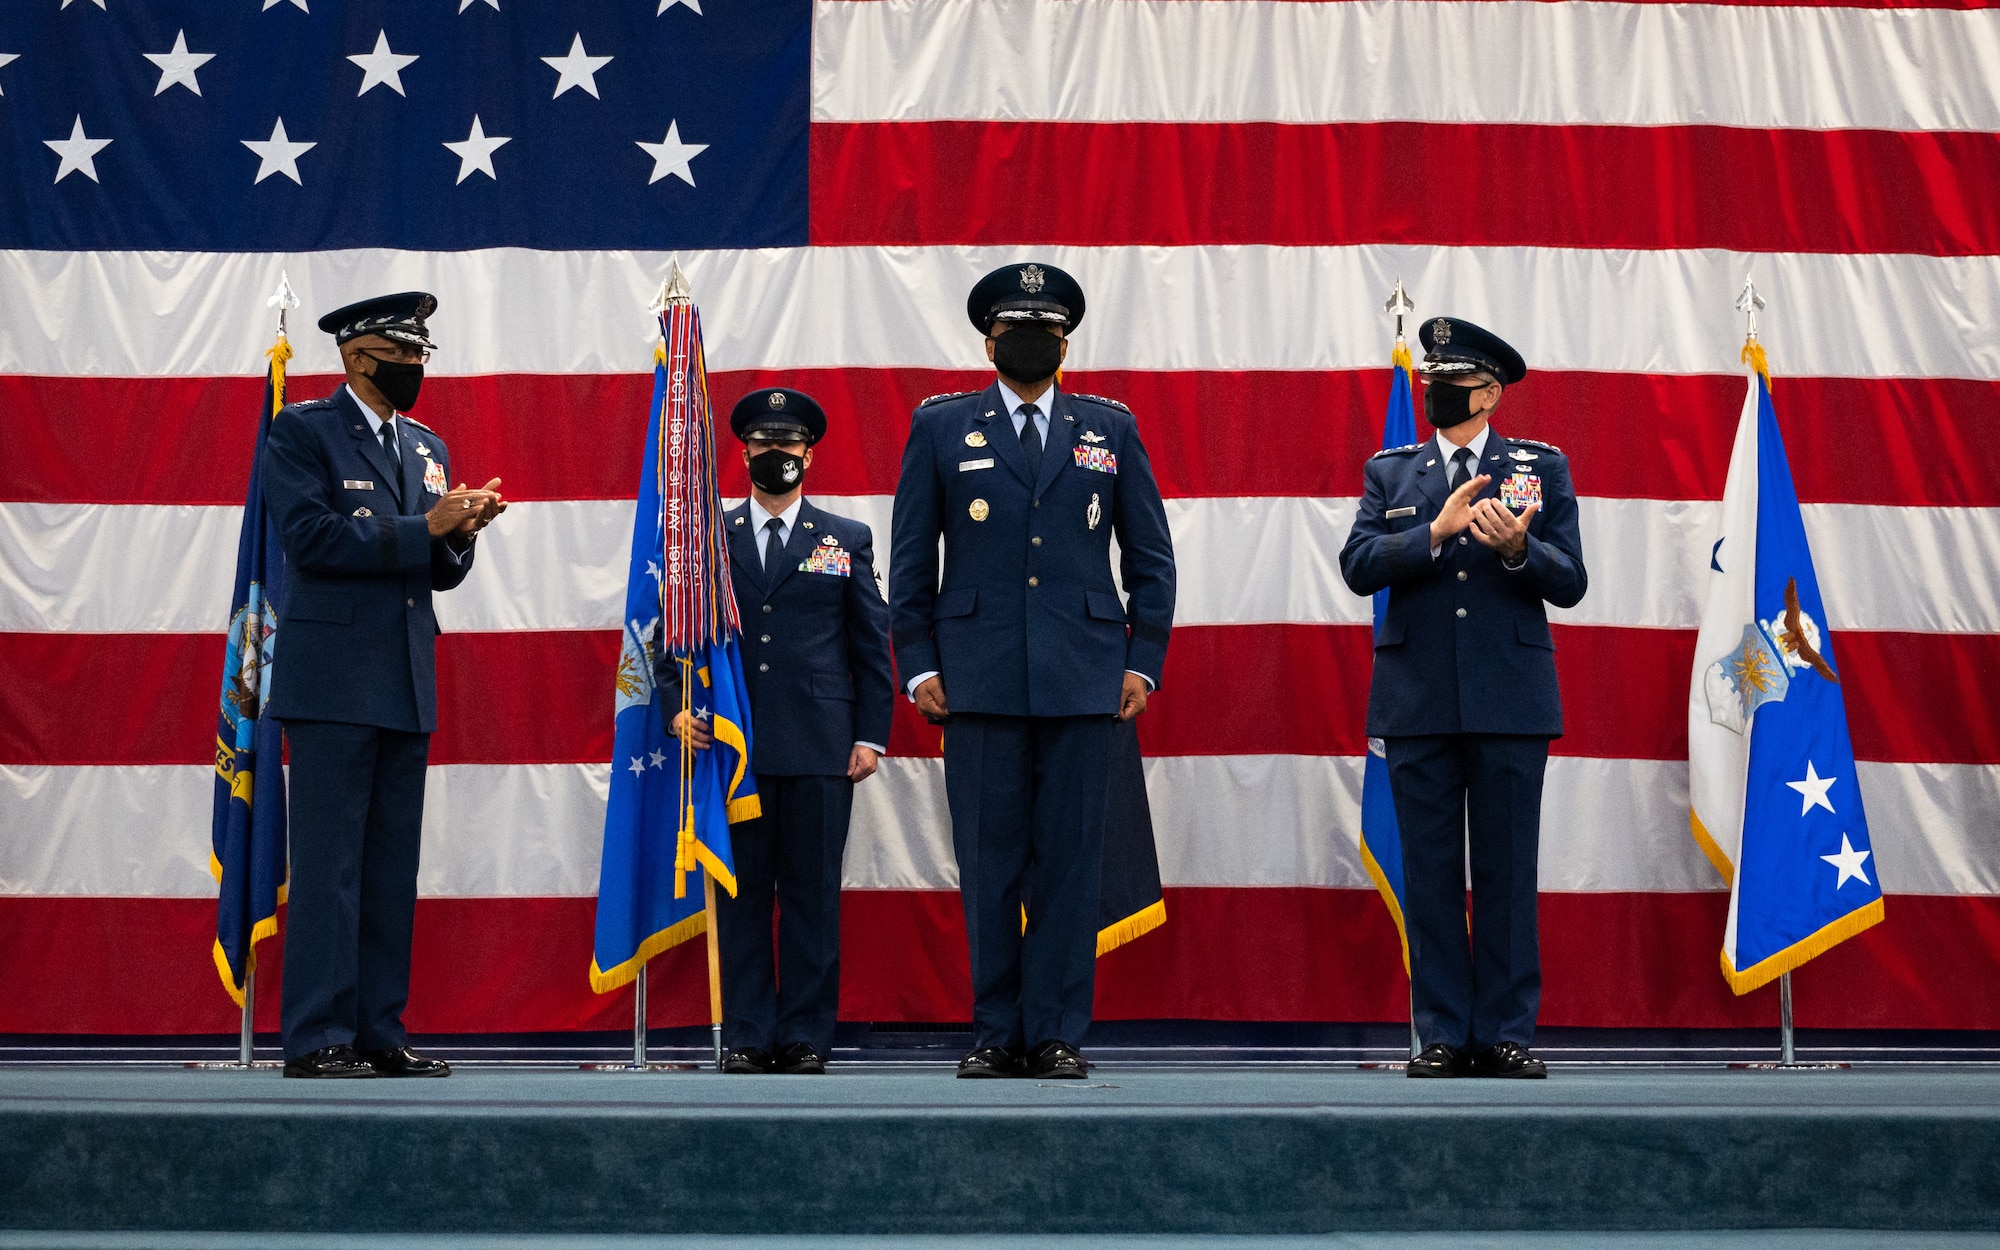 Gen. Anthony Cotton, incoming Air Force Global Strike Command commander, is congratulated by Air Force Chief of Staff Gen. CQ Brown, Jr., left, and Gen. Timothy Ray, right, outgoing AFGSC commander, during the AFGSC change of command ceremony at Barksdale Air Force Base, Louisiana, Aug. 27, 2021. Activated in 2009, AFGSC is responsible for the nation's three intercontinental ballistic missile wings, the Air Force’s entire bomber force, Air Force Nuclear Command, Control and Communications systems, and operational and maintenance support to organizations within the nuclear enterprise. (U.S. Air Force photo by Senior Airman Jacob B. Wrightsman)